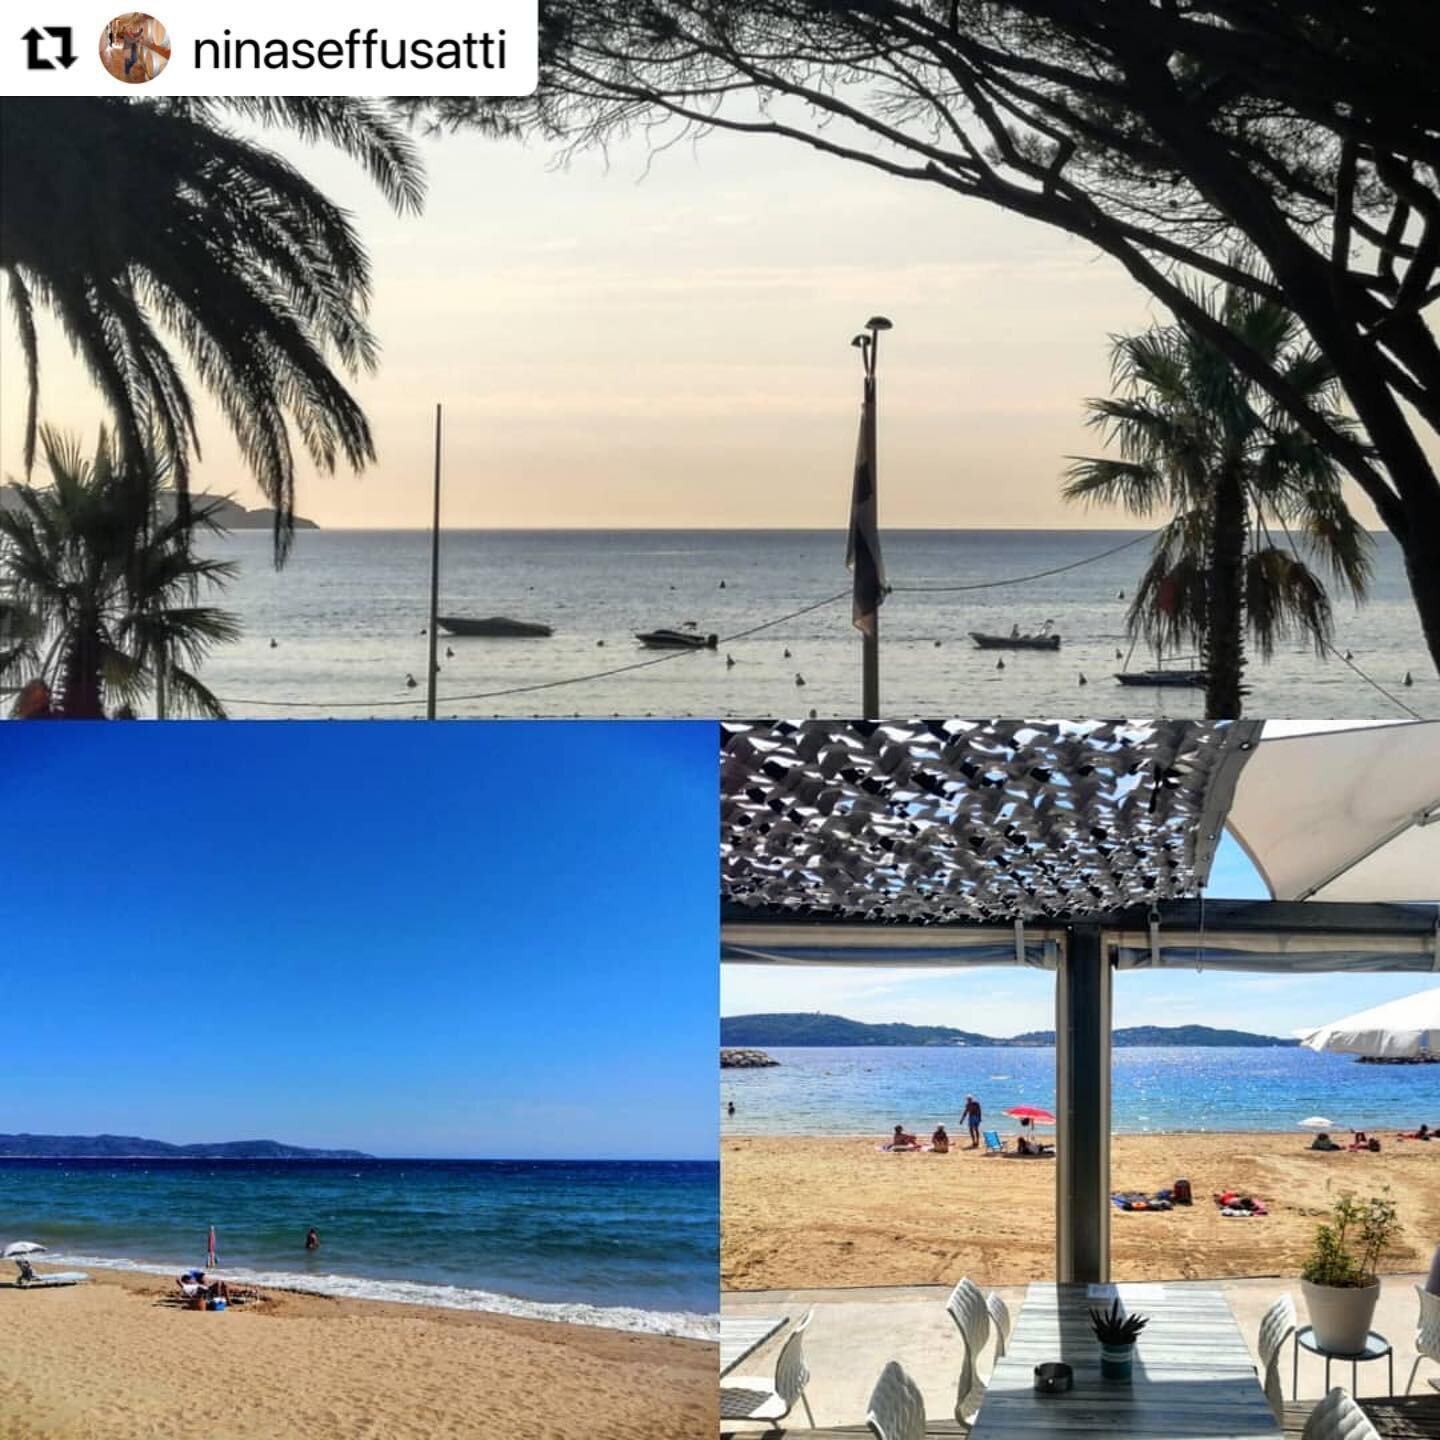 Our Nina&rsquo;s Friday is not lookin&rsquo; so bad!!! Southern France in September...

#Repost @ninaseffusatti with 
・・・
Lovely September days by the Mediterranean

#frenchriviera #costazzura #france #traveladdicted #beach #tgif 
@guide.collective #